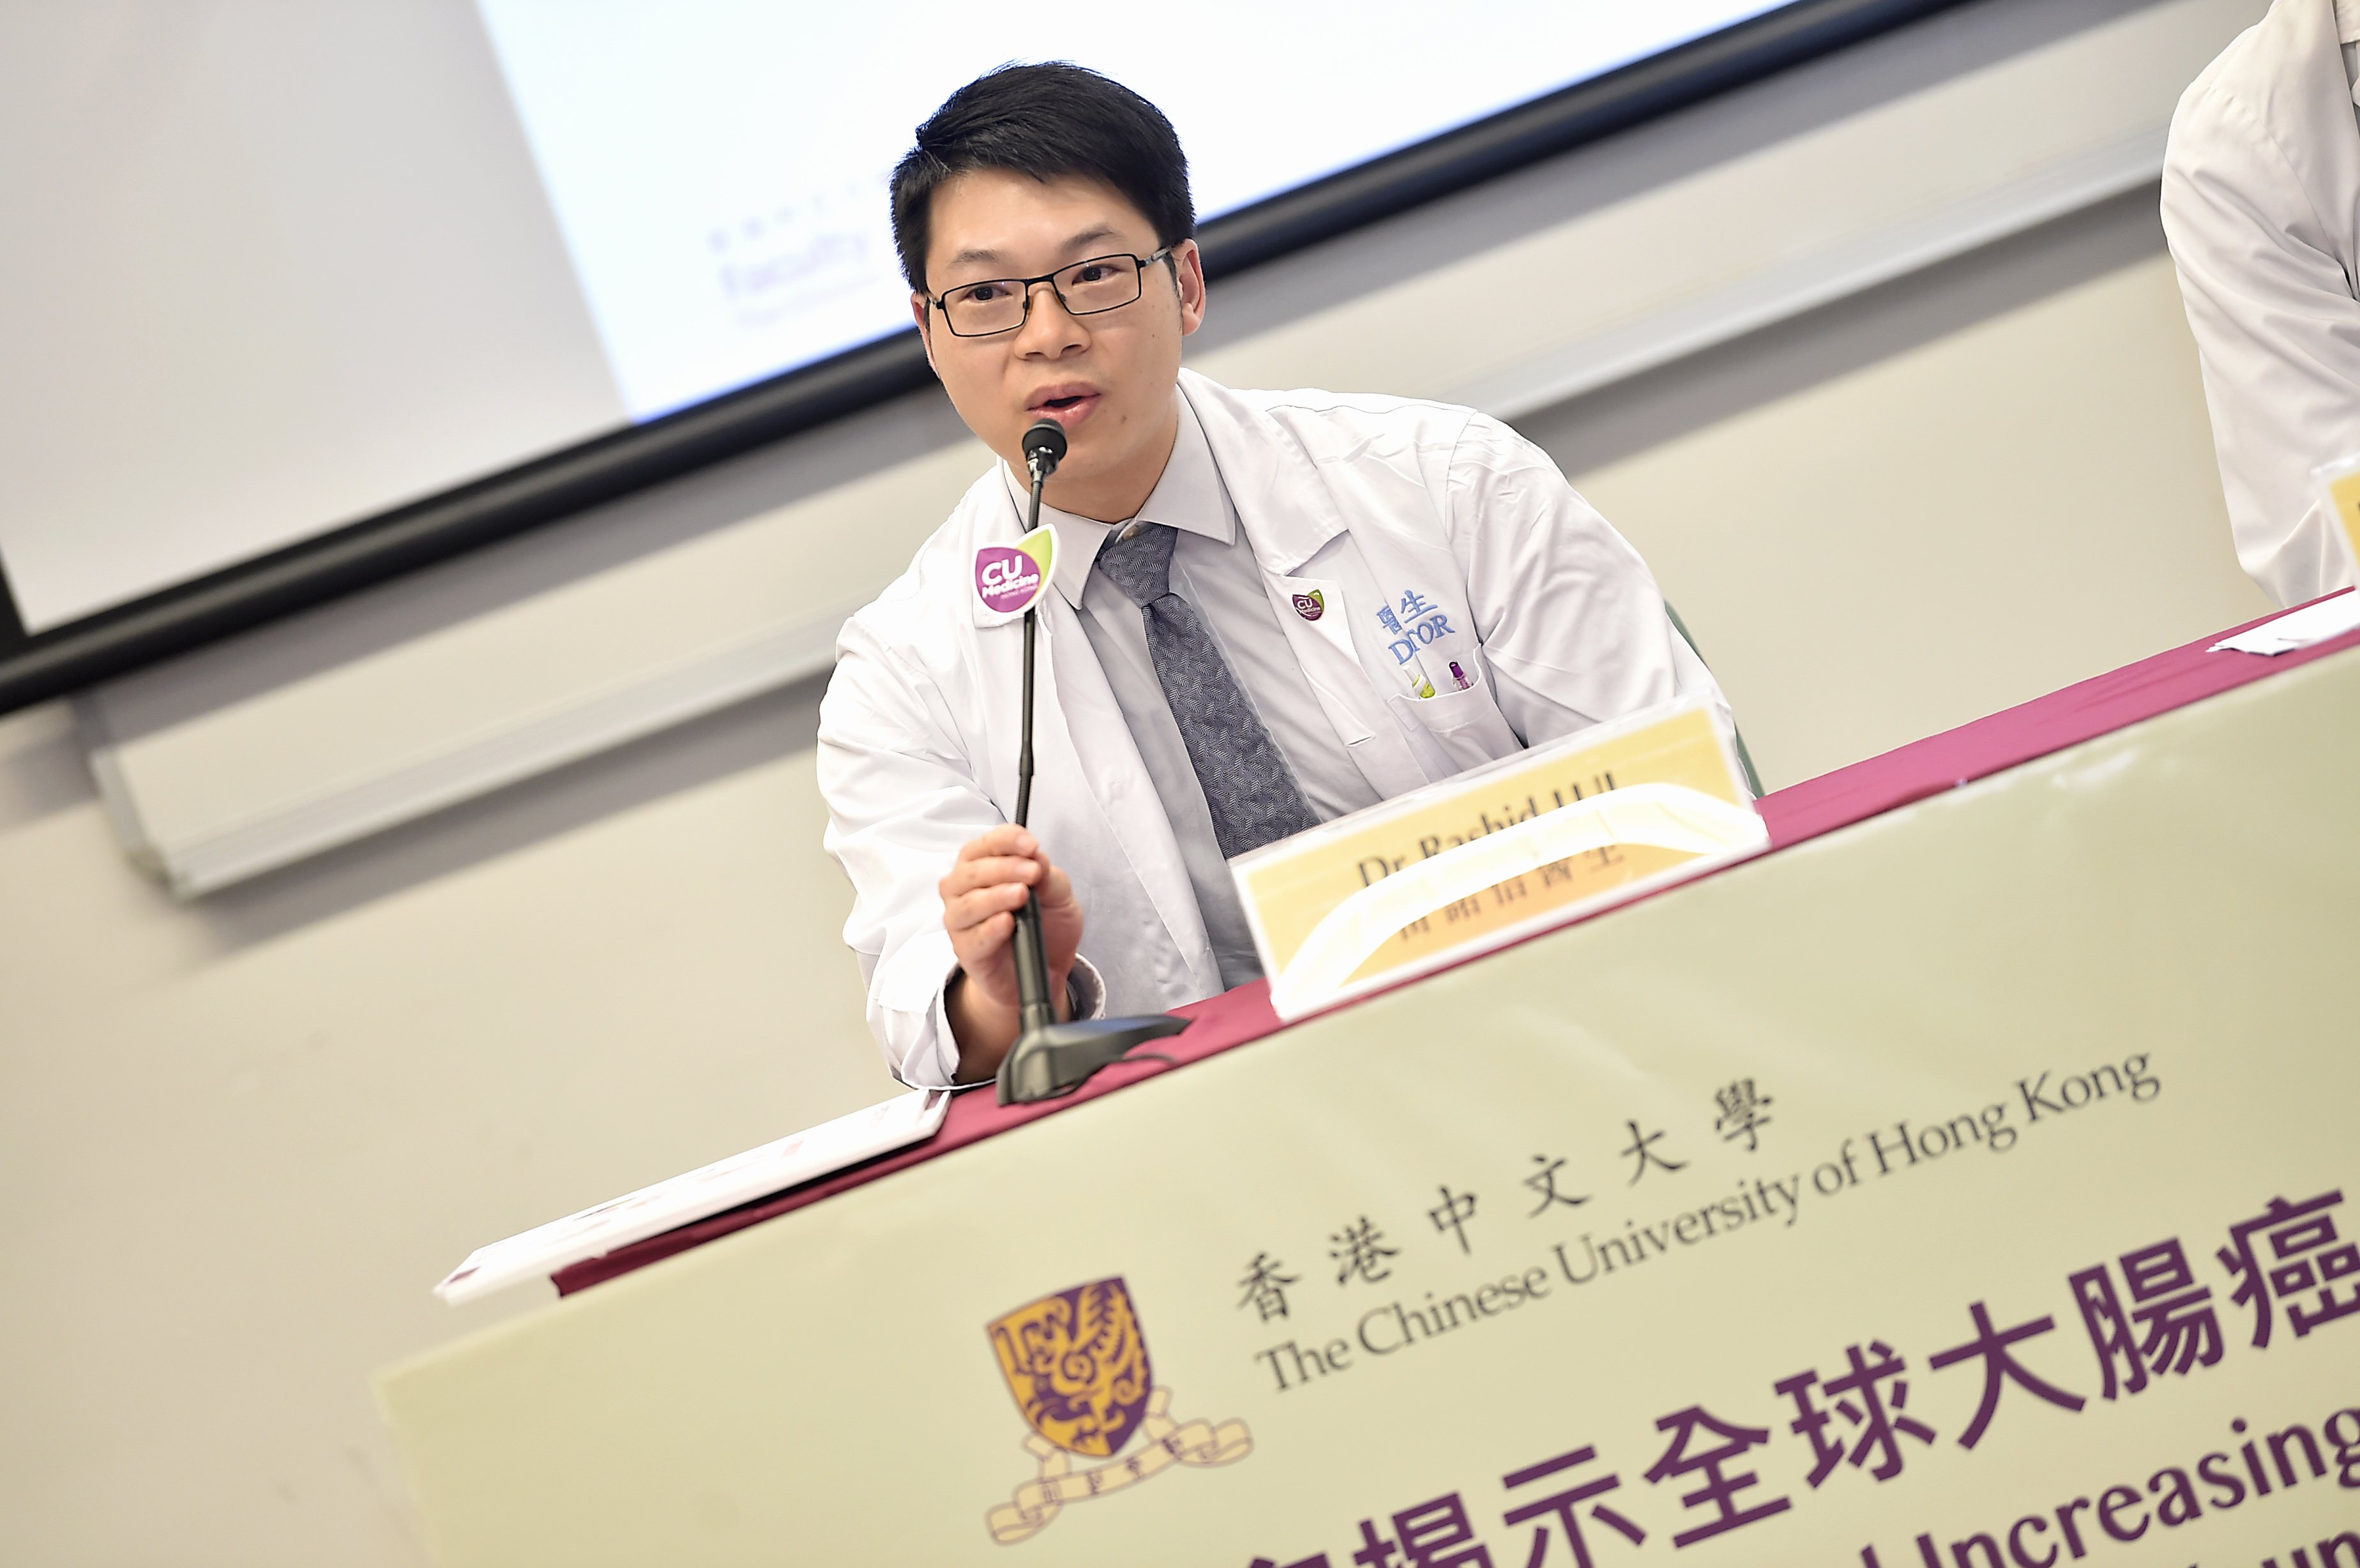 Dr Rashid LUI hopes the recent study can raise the public awareness of the shift towards colorectal cancer incidence in the younger population.